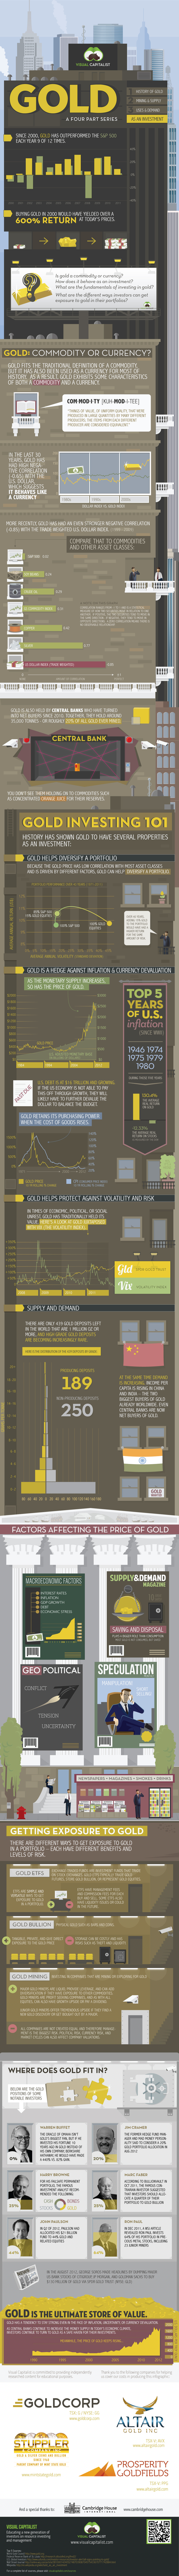 gold-investment-infographic